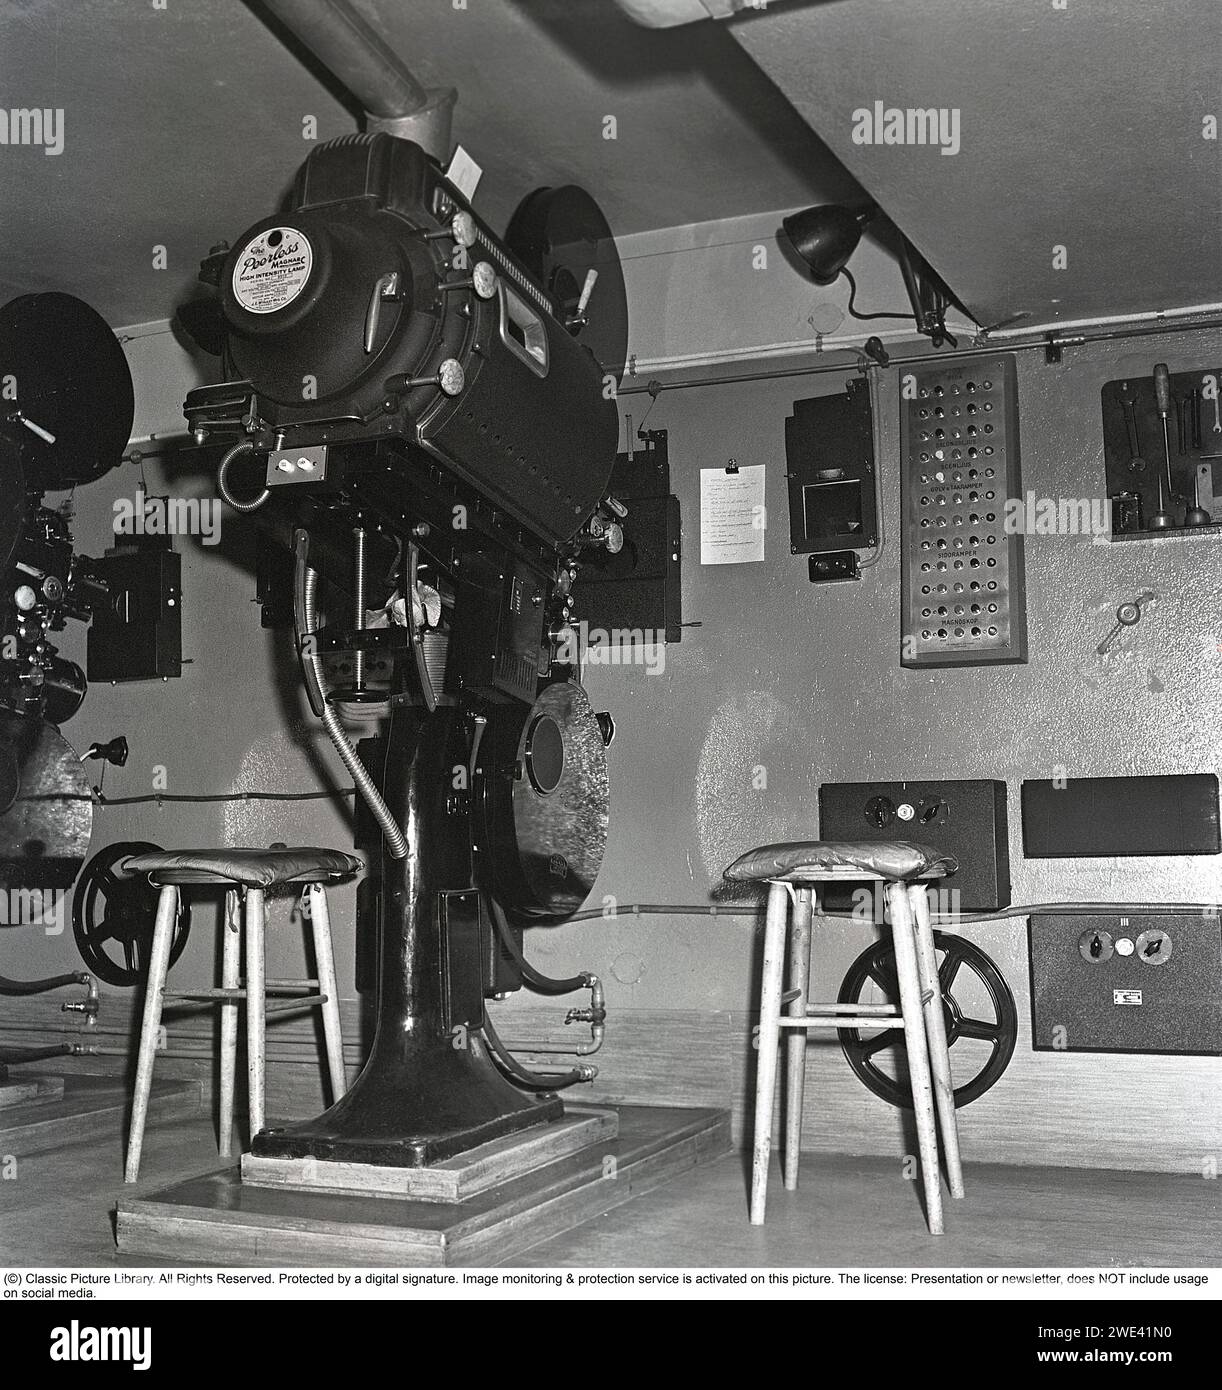 Behind the scenes at the movie theatre. Cinema in the 1940s. The projector room at cinema Rigoletto in Stockholm. Two film projectors are used. Since feature films did not fit on one roll of film, it was important that the machinist be adept at switching to the next projector with the next roll when the time came. The cinema operator also manages the lighting in the cinema hall. A control panel on the right controls the light in the cinema hall, stage lights etc. and also the curtain. A magnoscope is also operated from here (to enlarge the image in spectacular sequences) 1947 Kristoffersson re Stock Photo